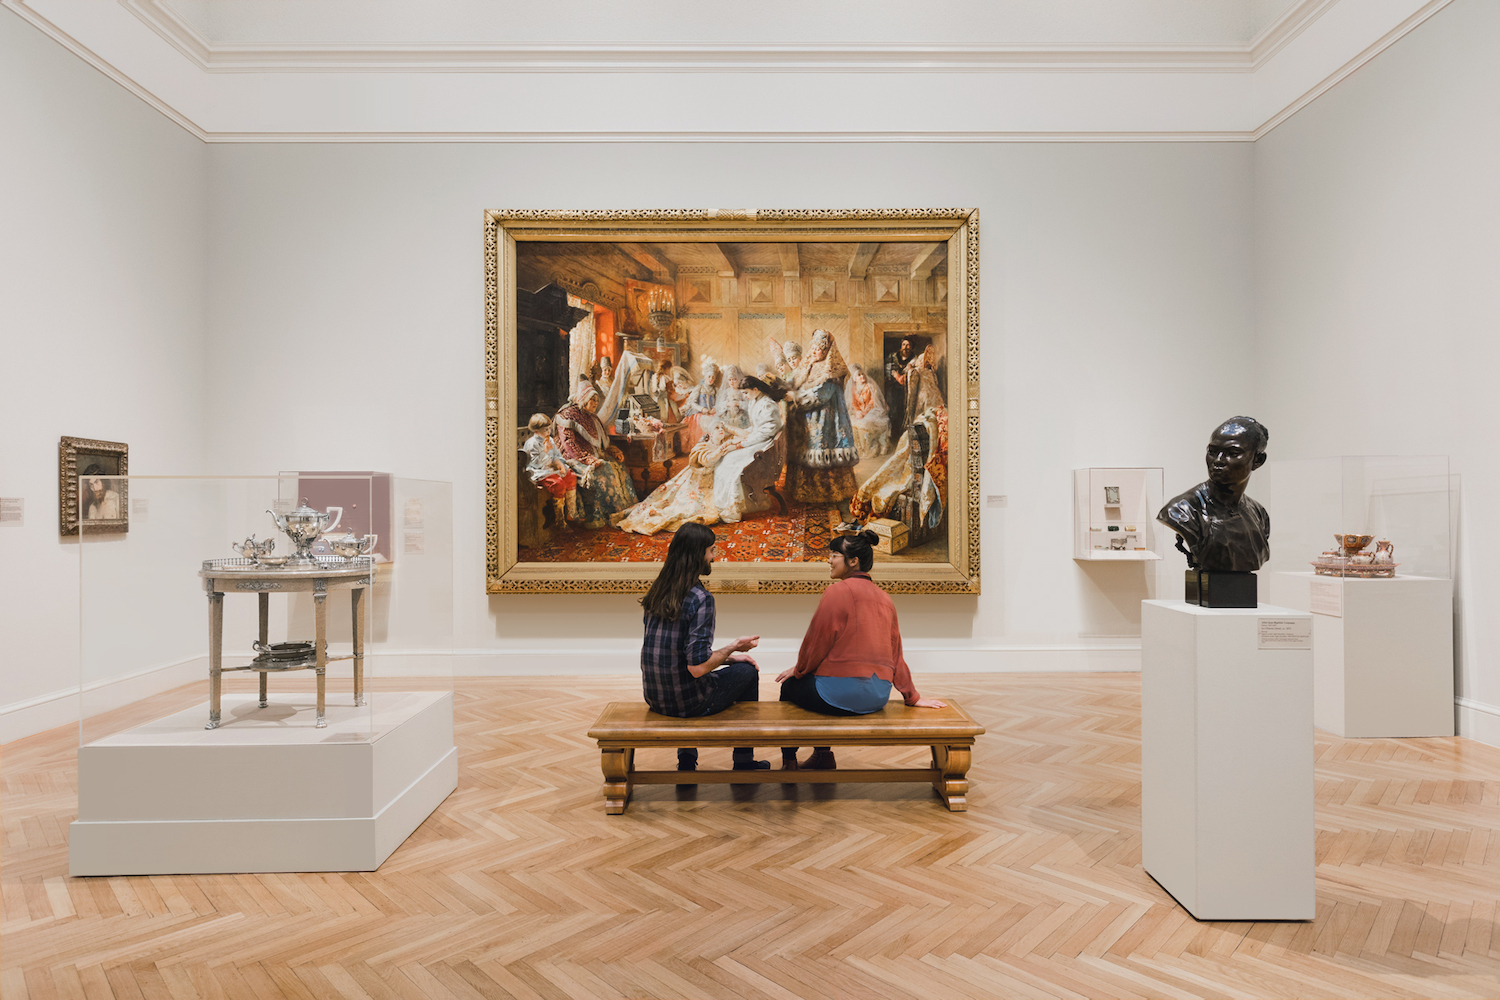 two people sitting on a bench in a museum talking and admiring a gold-framed painting